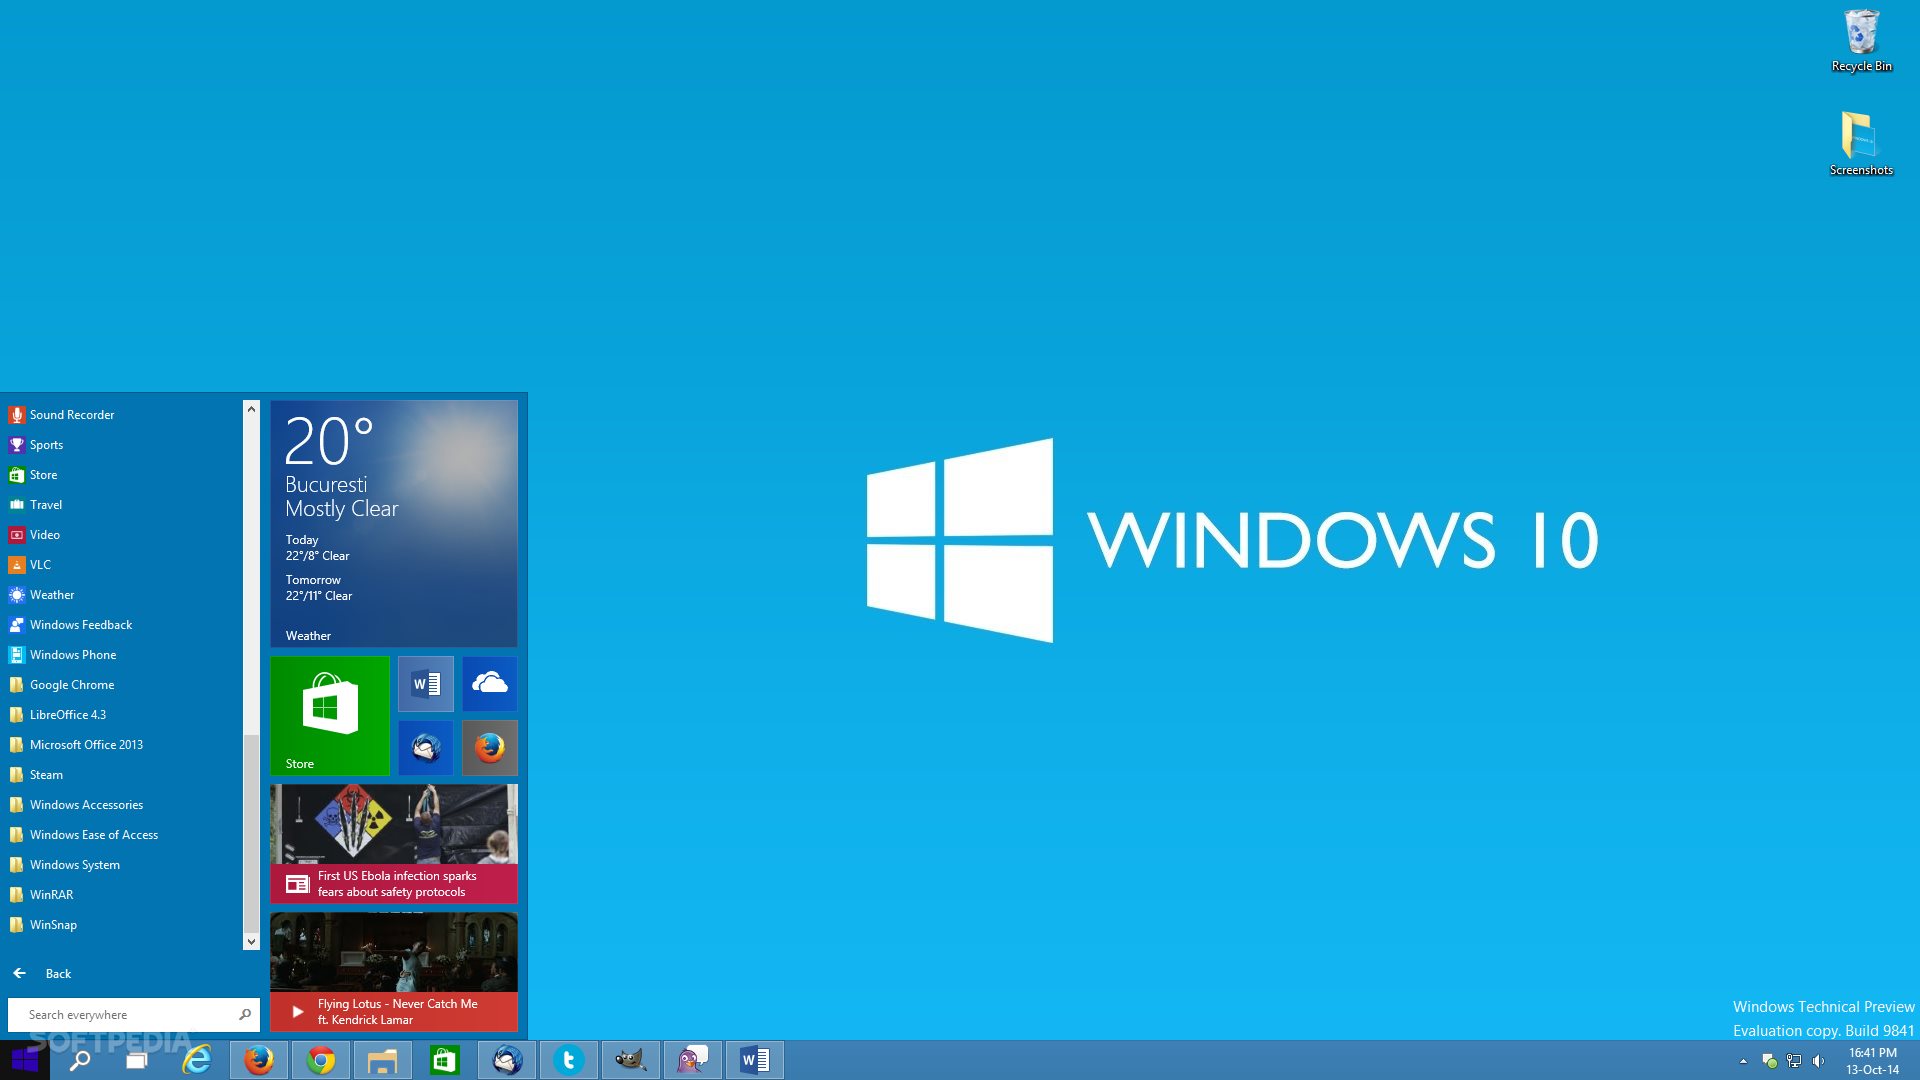 Windows 10 Consumer Preview References Spotted in Testing Builds1920 x 1080